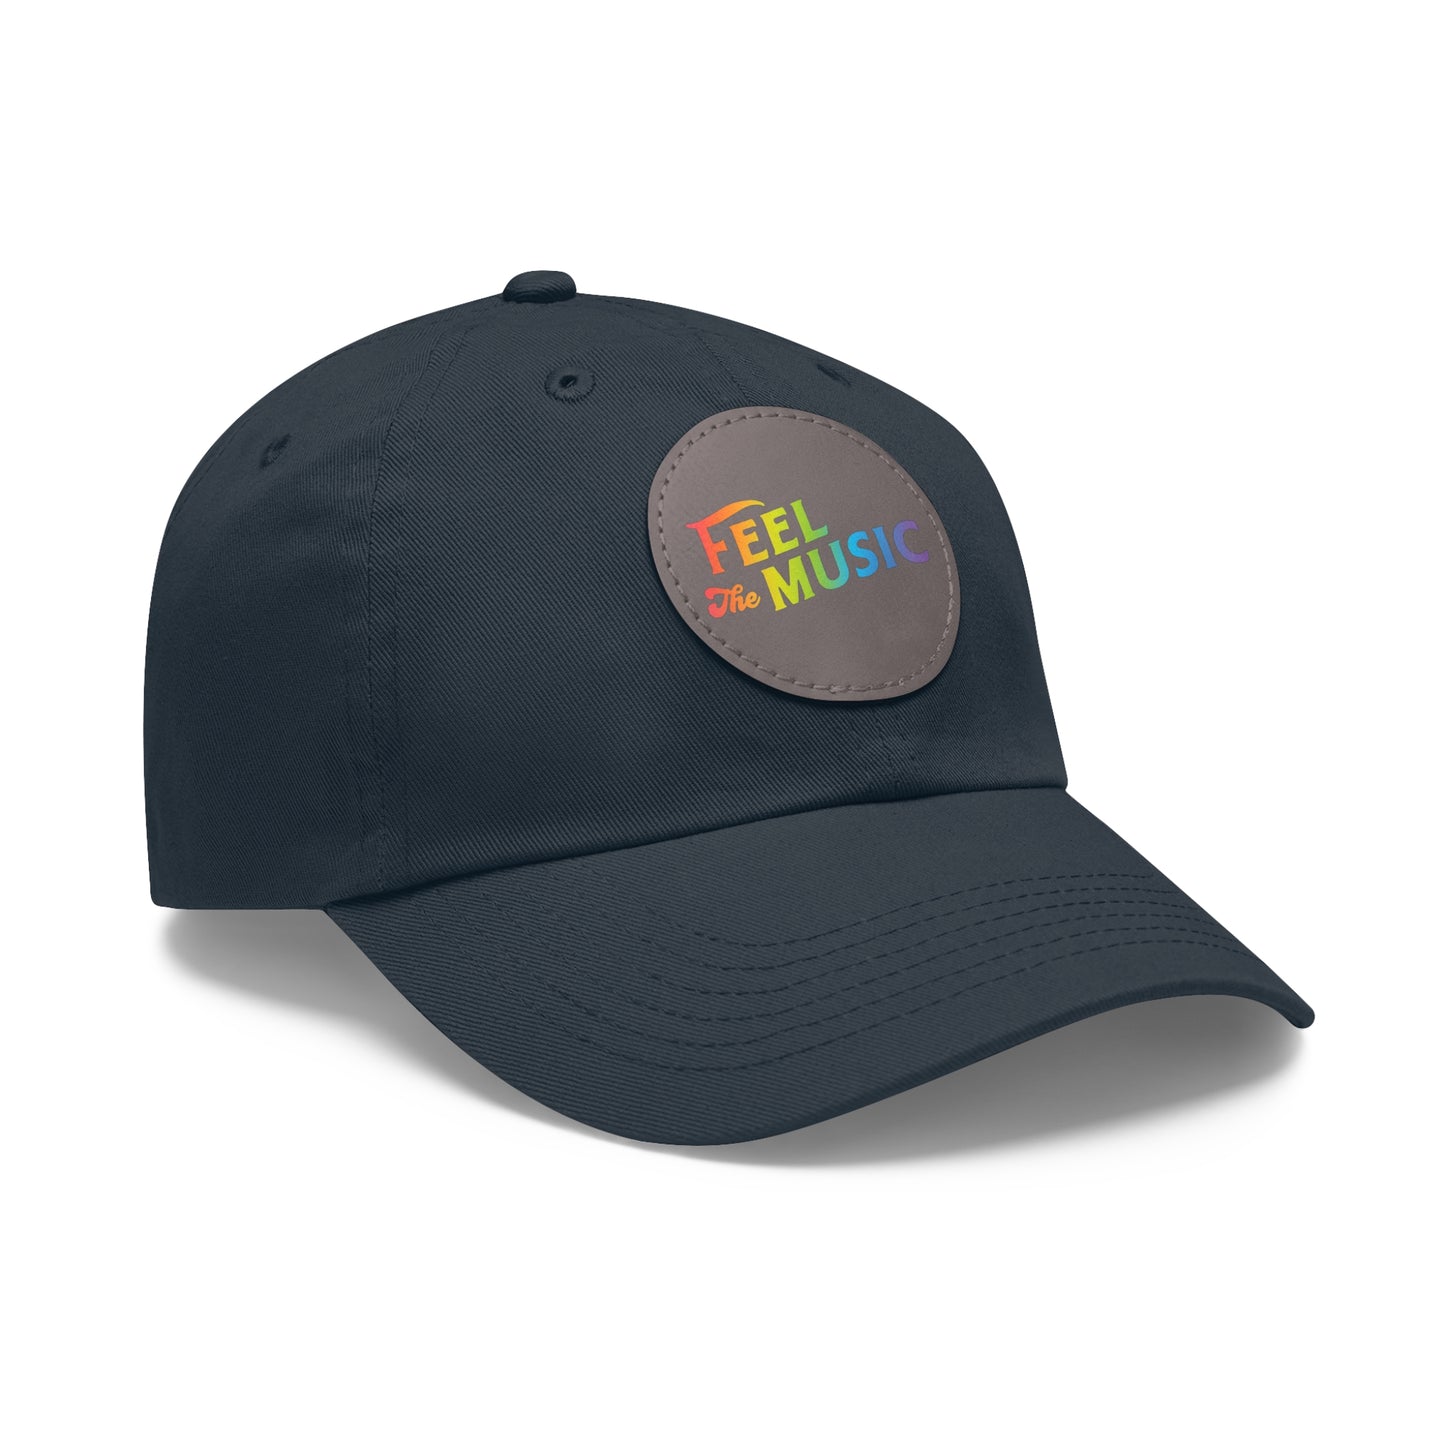 Feel the Music Dad Hat with Leather Patch (Round)